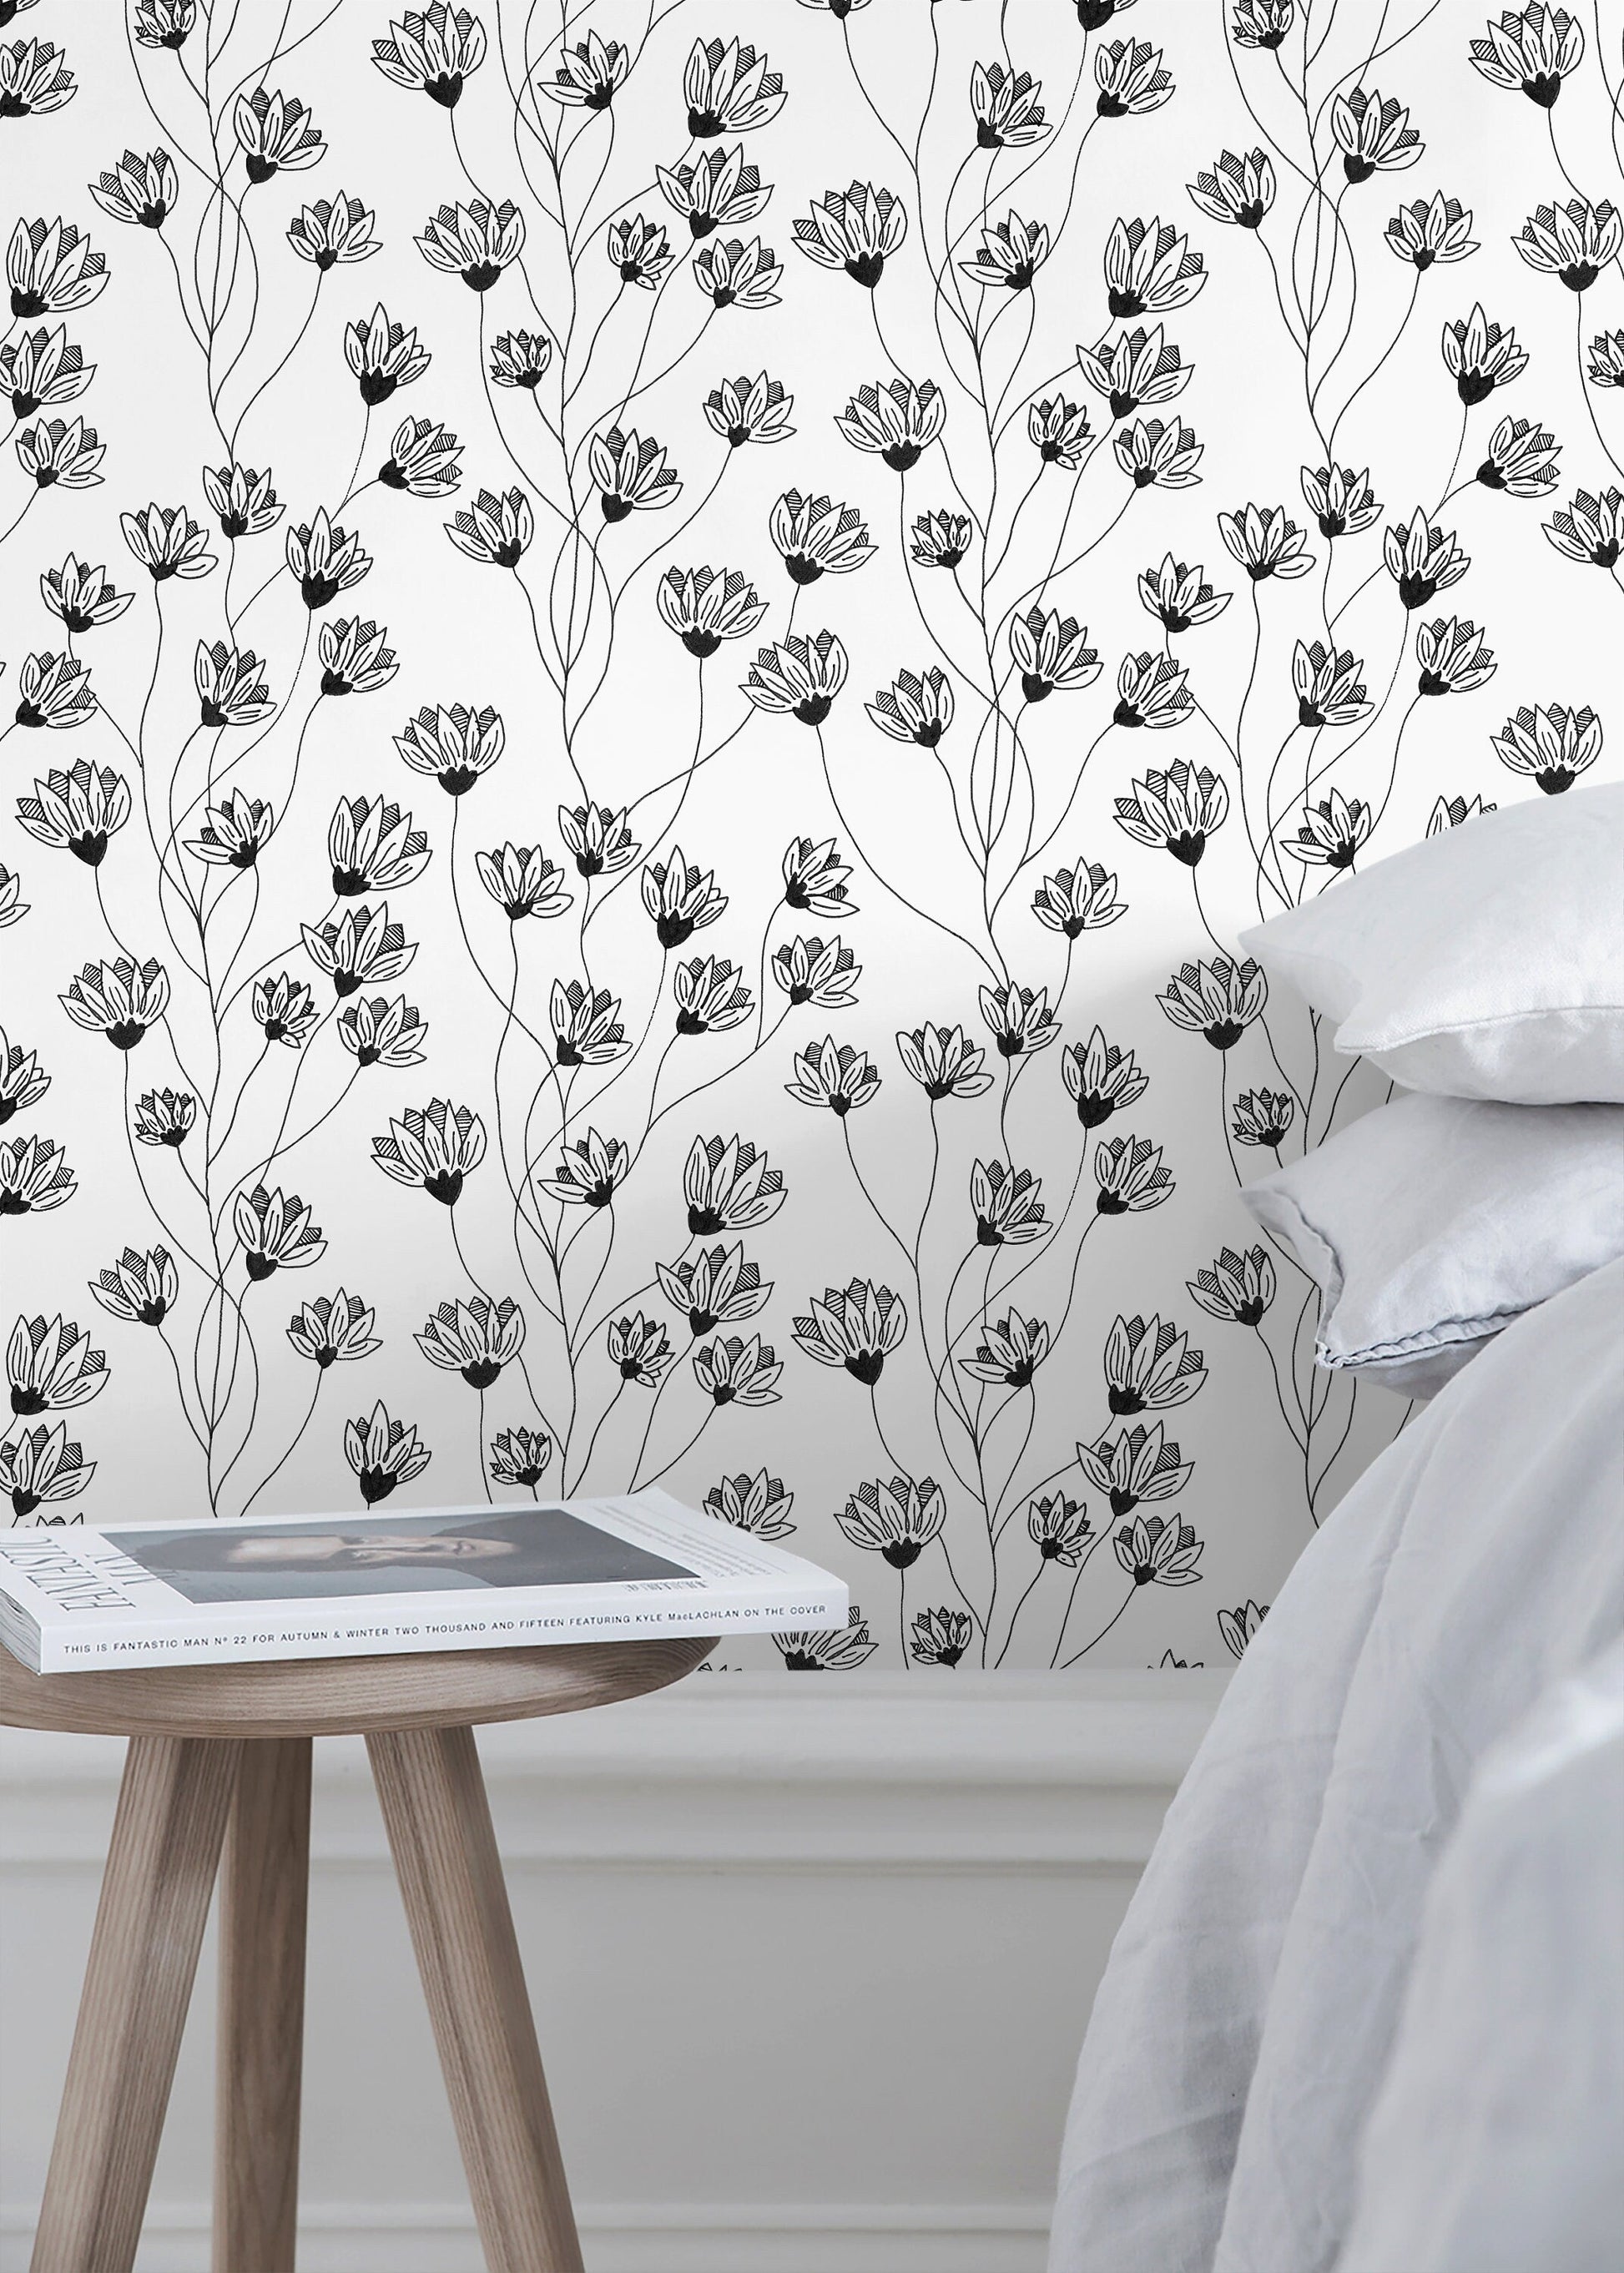 Black and White Wild Flowers Wallpaper / Peel and Stick Wallpaper Remo 